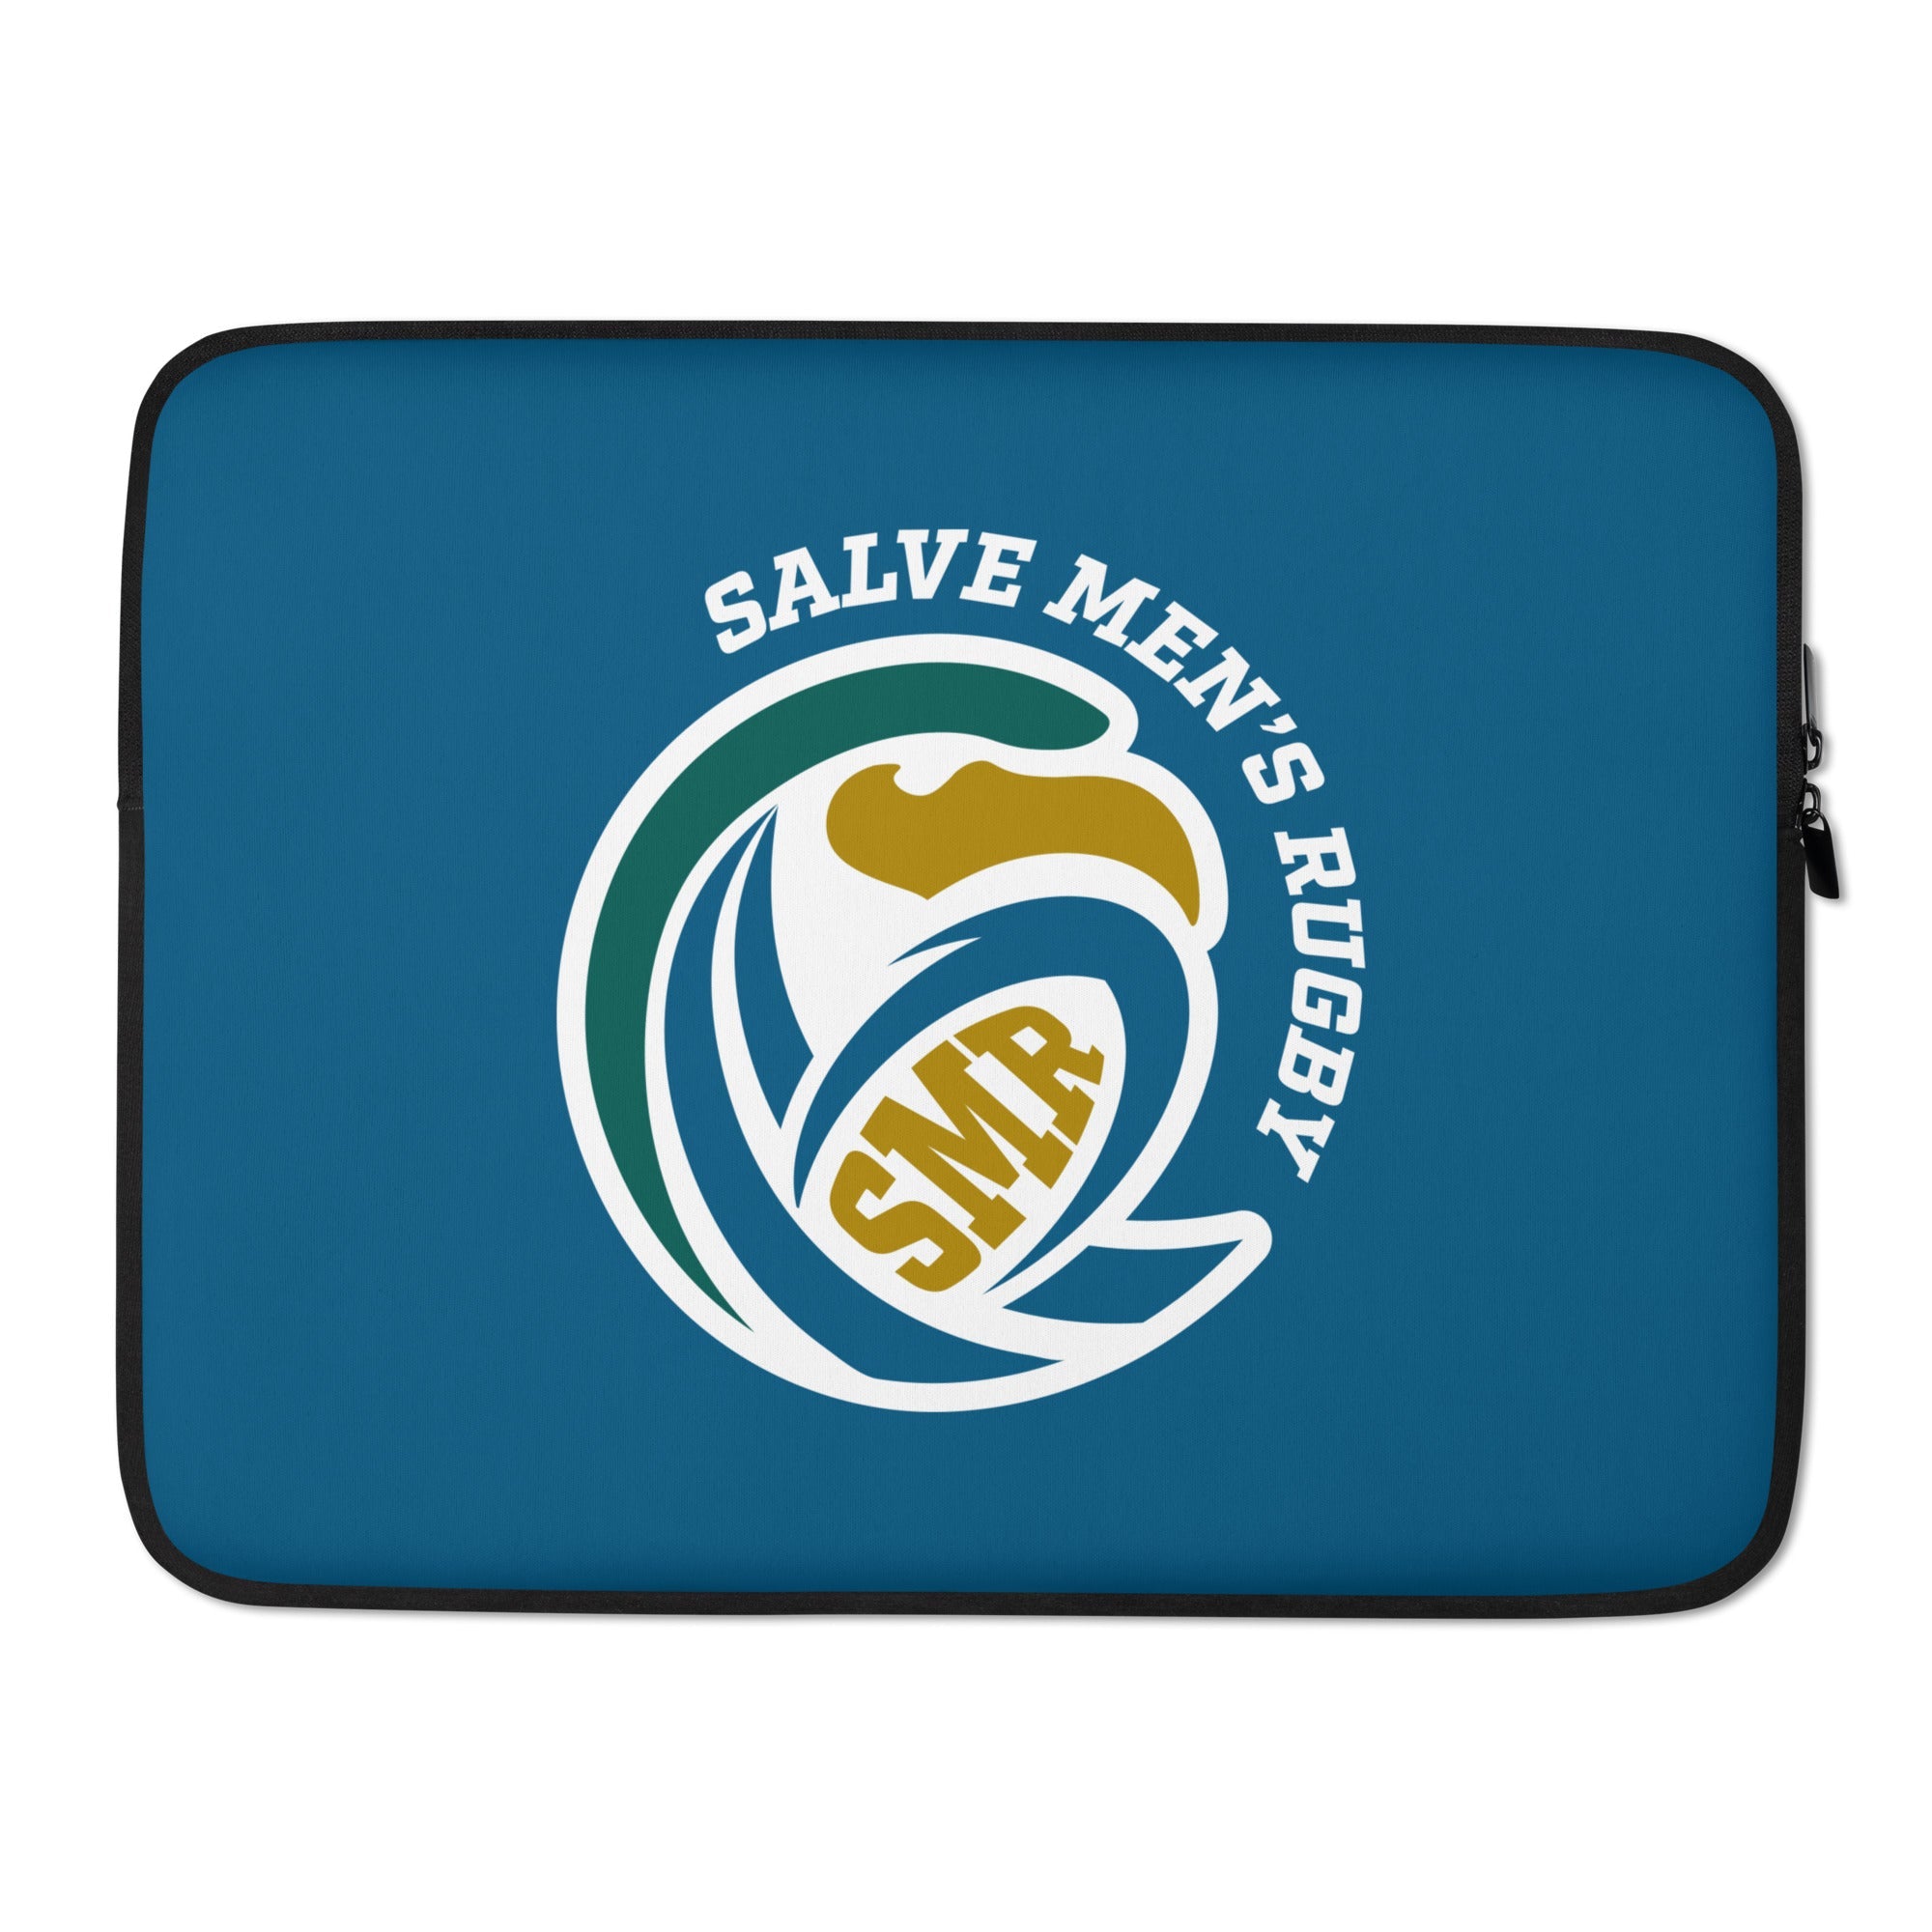 Rugby Imports Salve Men's Rugby Laptop Sleeve